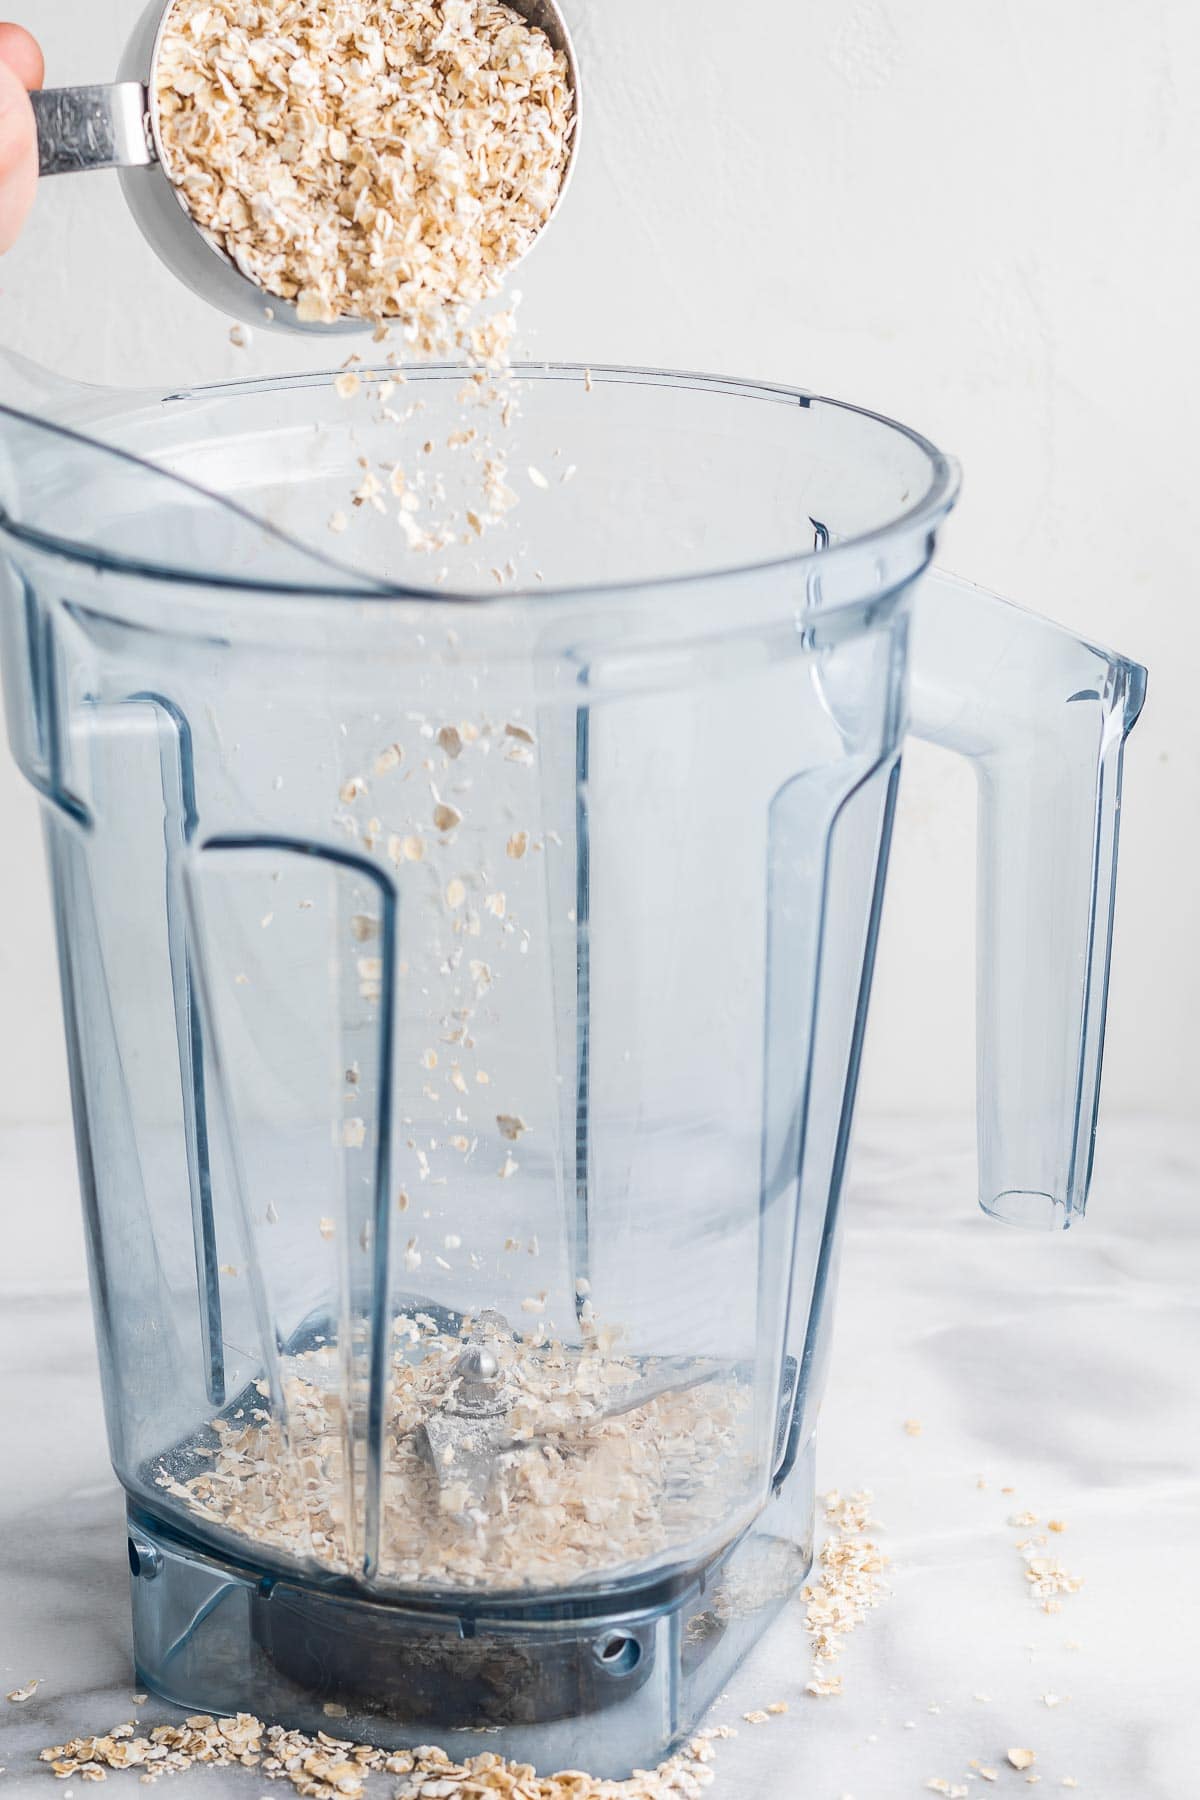 rolled oats in the blender